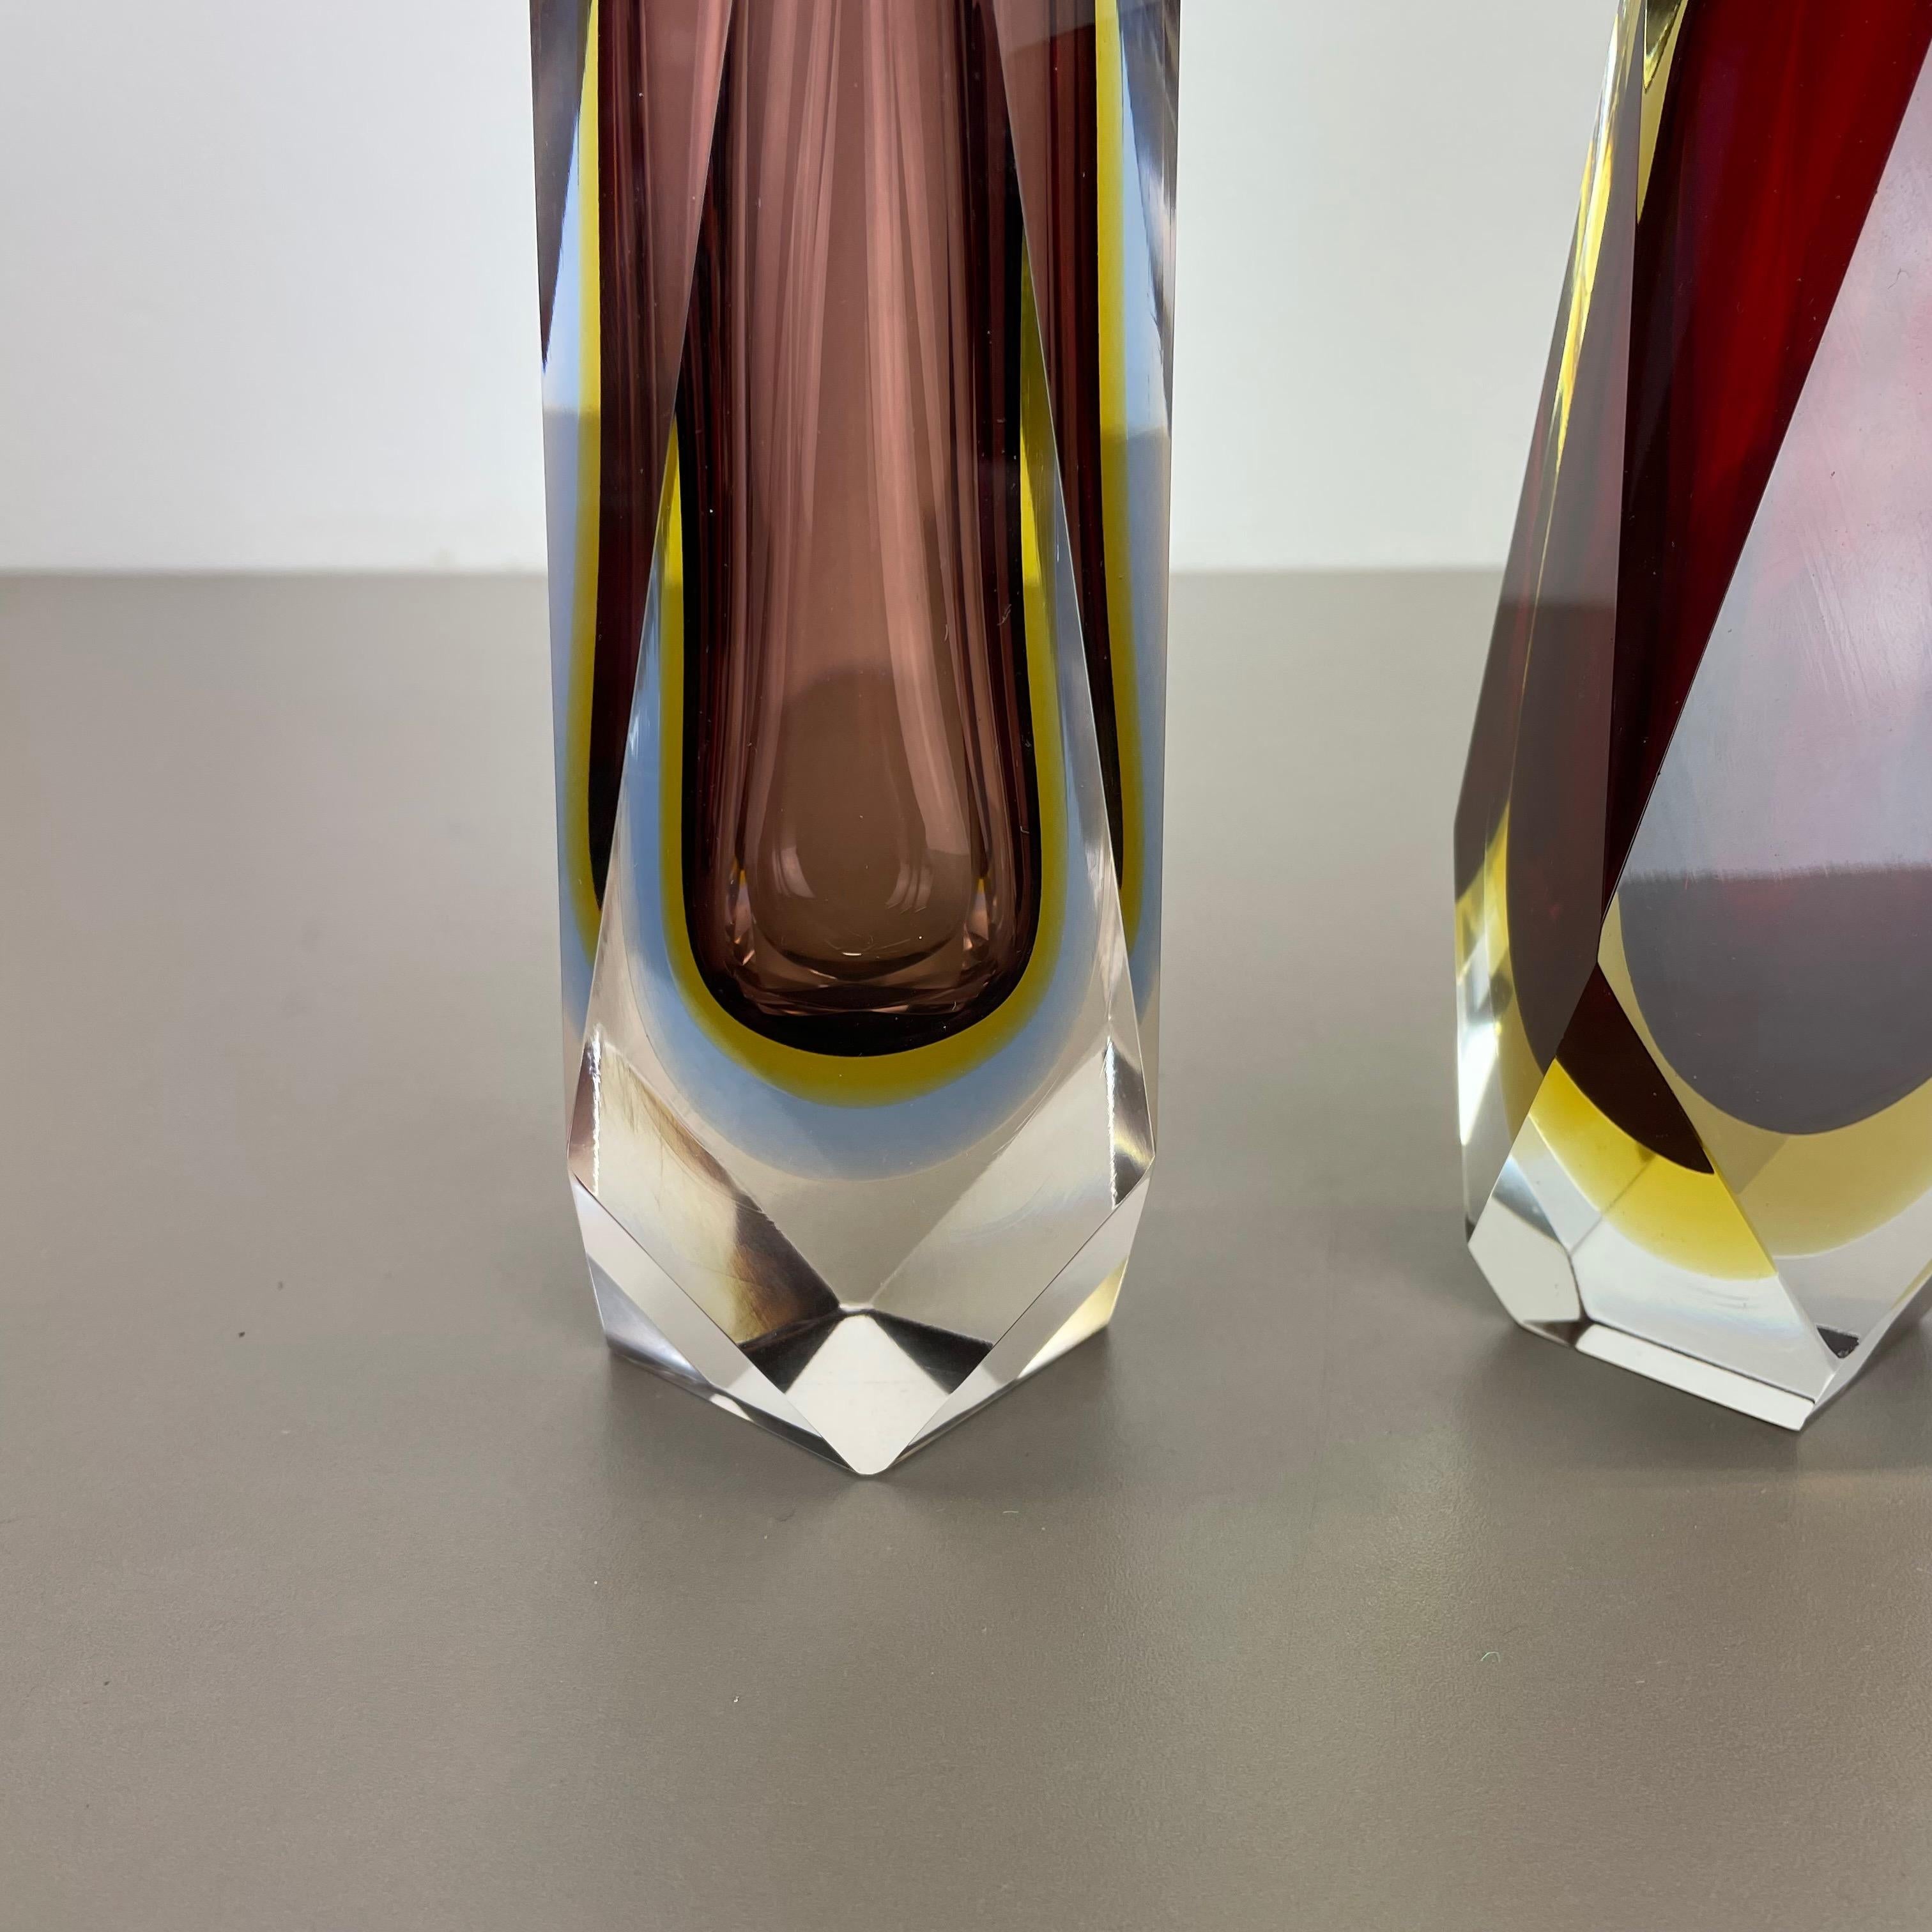 Italian Set of 2 Faceted Murano Glass Sommerso Vase Designed by Flavio Poli Italy, 1970s For Sale